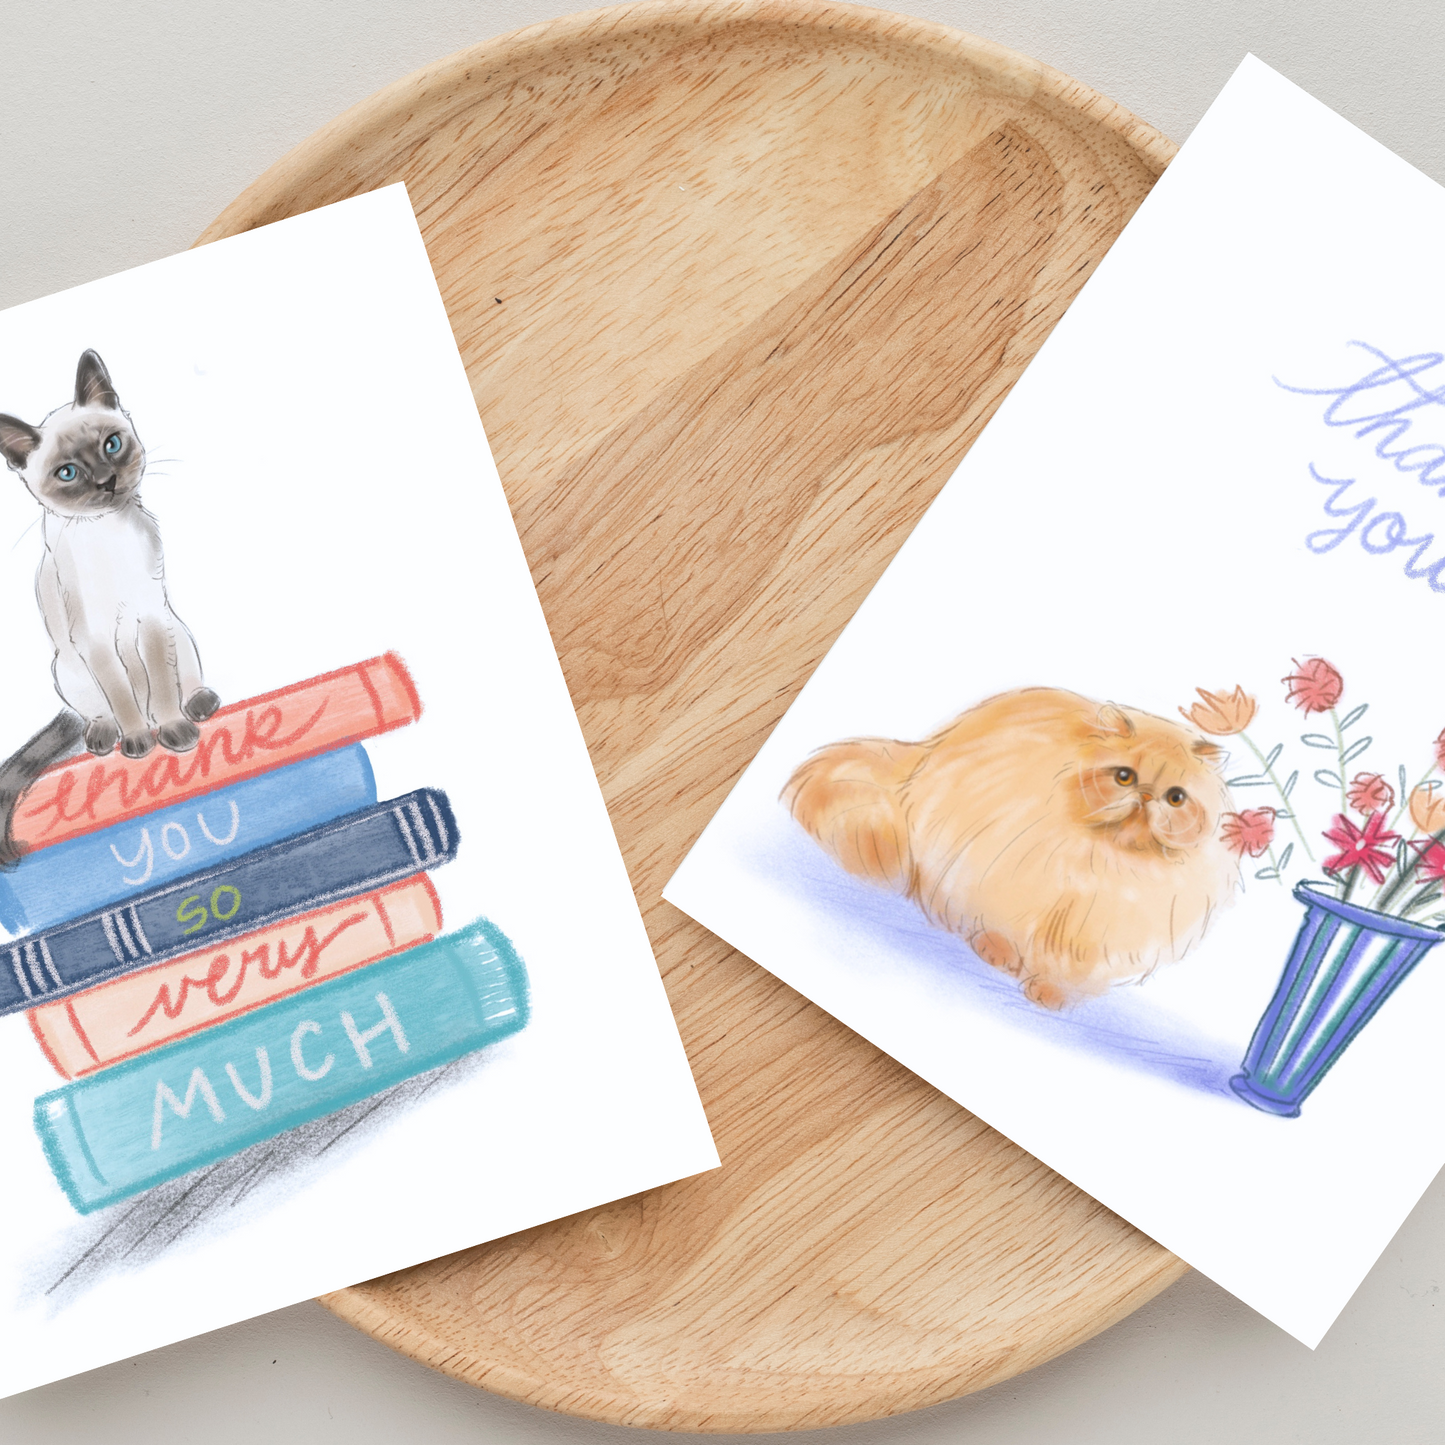 Cat Thank You Cards | Set of 6 Cat Thank You Cards | Blank Cat Cards